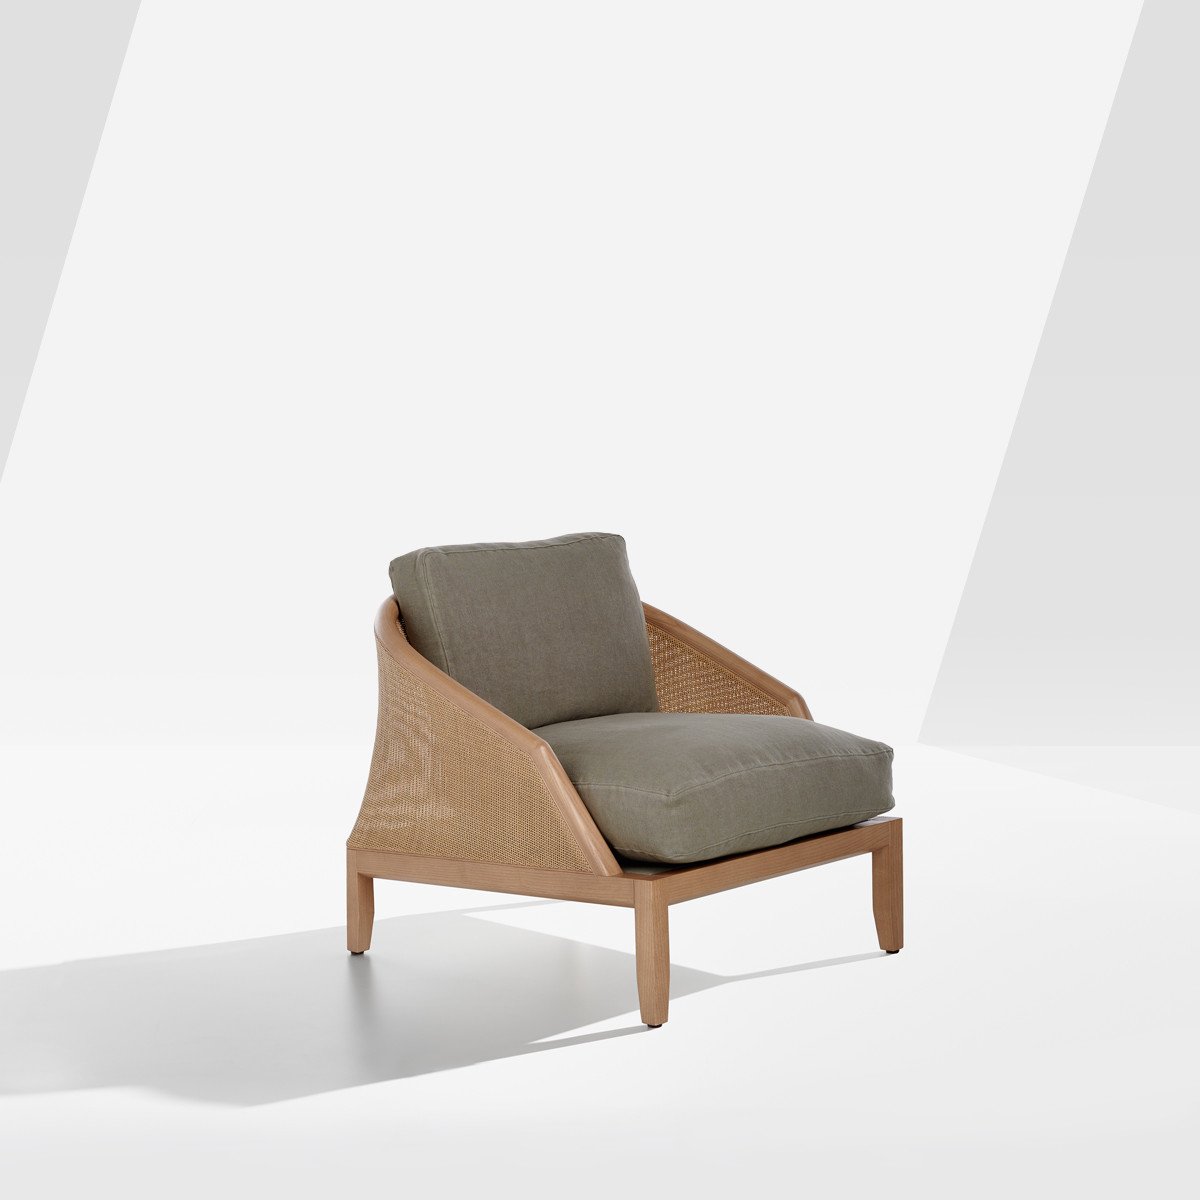 Grace Lounge Armchair from Potocco, designed by Mauro Lipparini